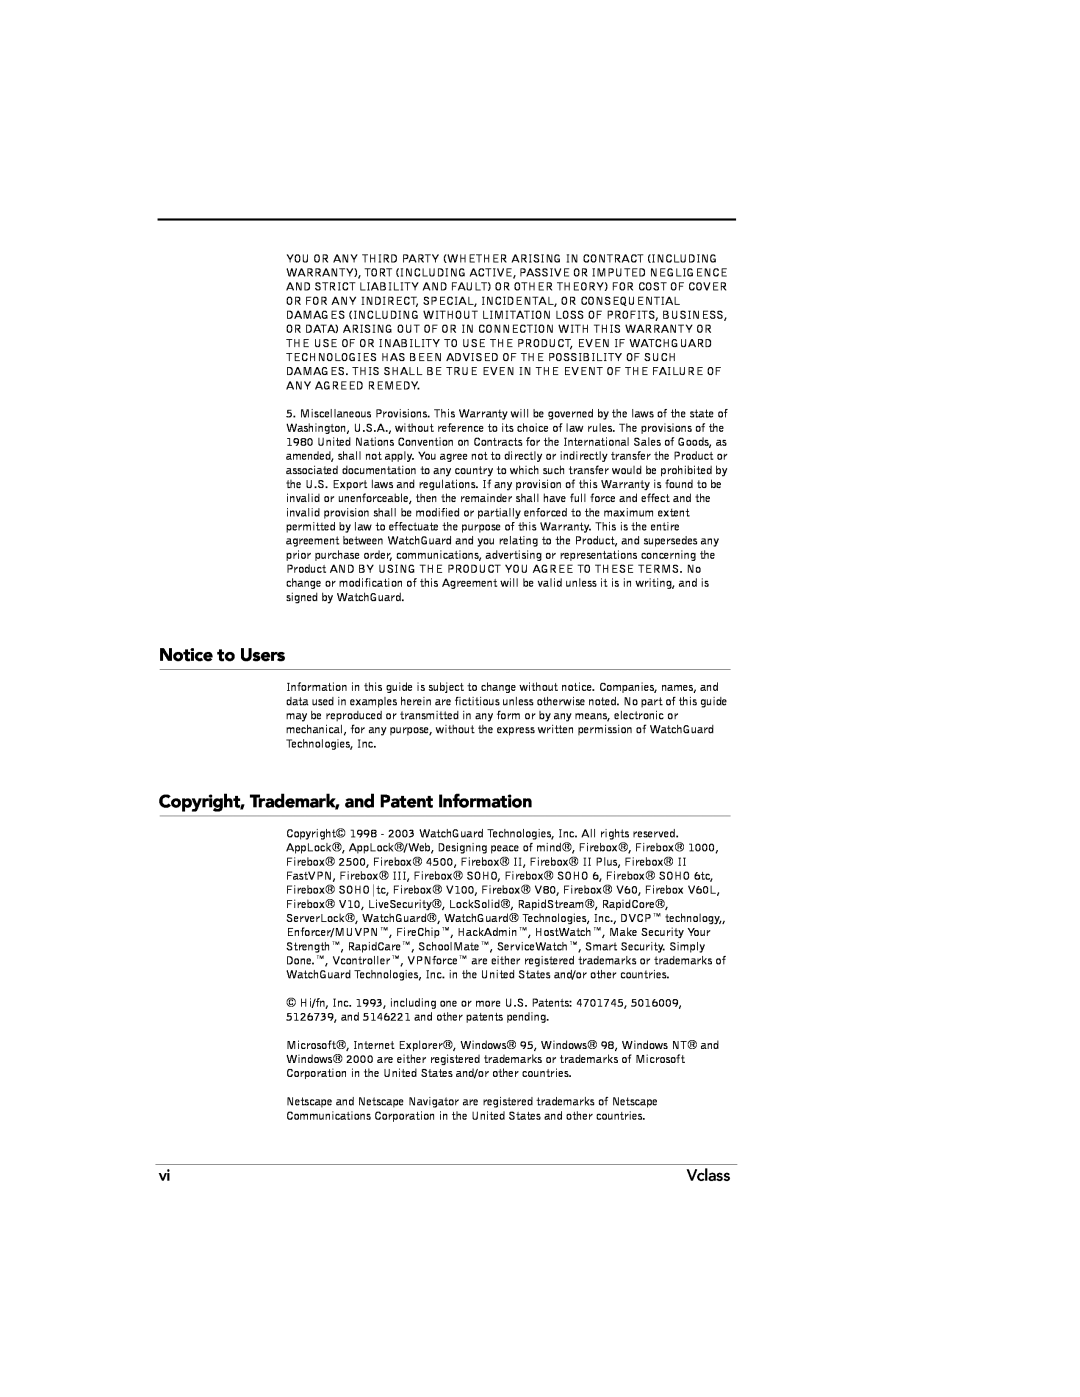 WatchGuard Technologies V60L, V80, V100 manual Notice to Users, Copyright, Trademark, and Patent Information, Vclass 